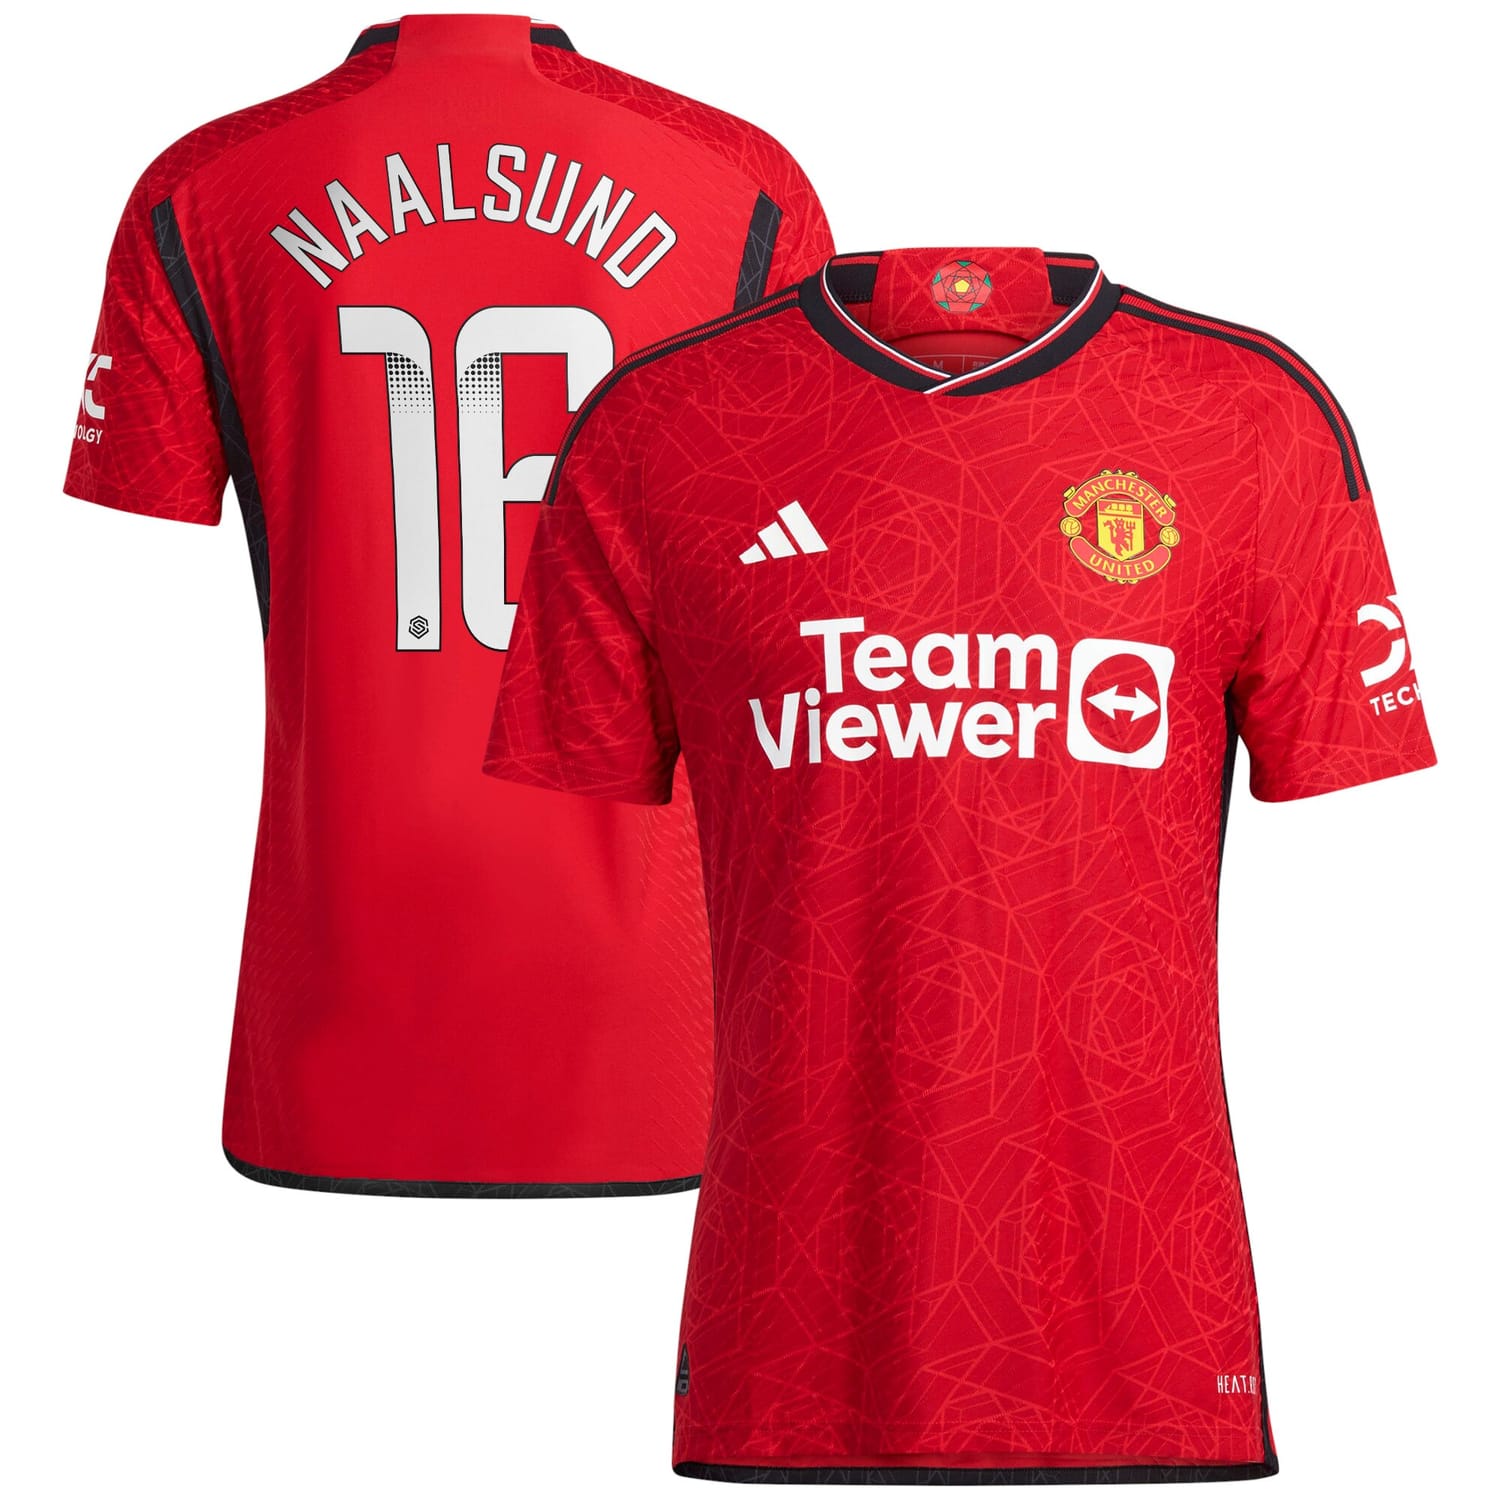 Premier League Manchester United Home WSL Authentic Jersey Shirt 2023-24 player Lisa Naalsund 16 printing for Men